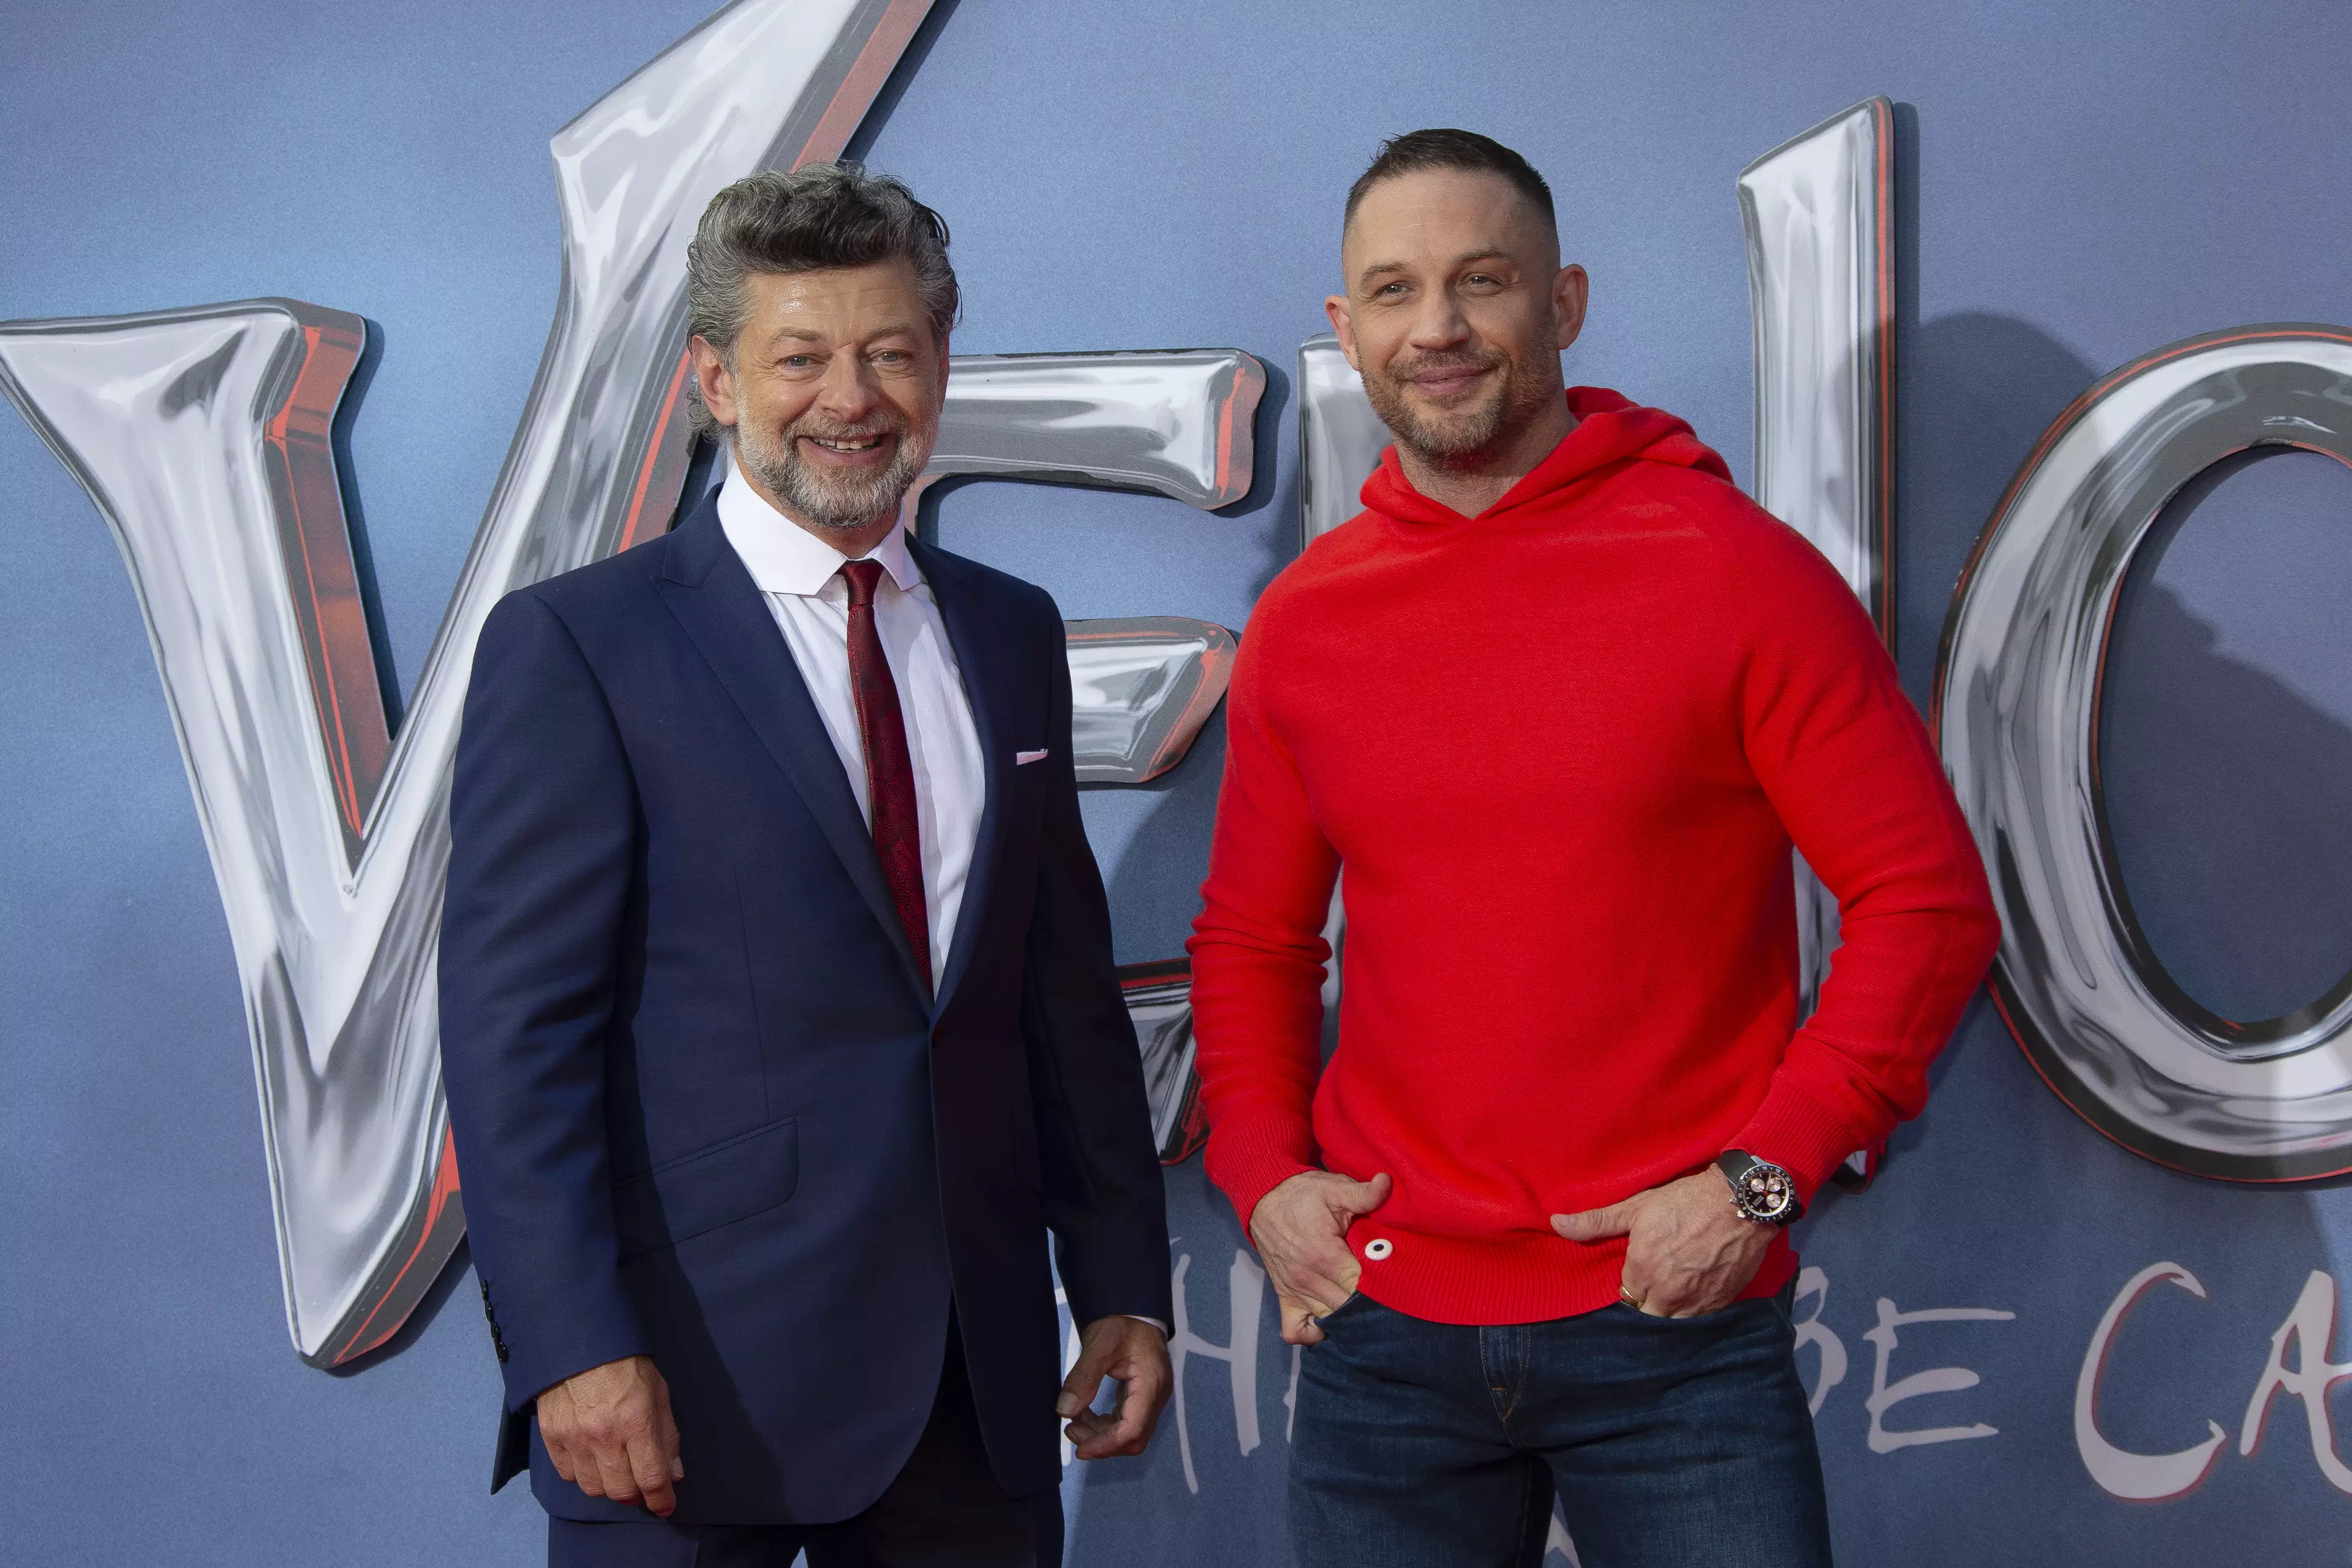 Hardy with Andy Serkis at the Venom 2 premiere.